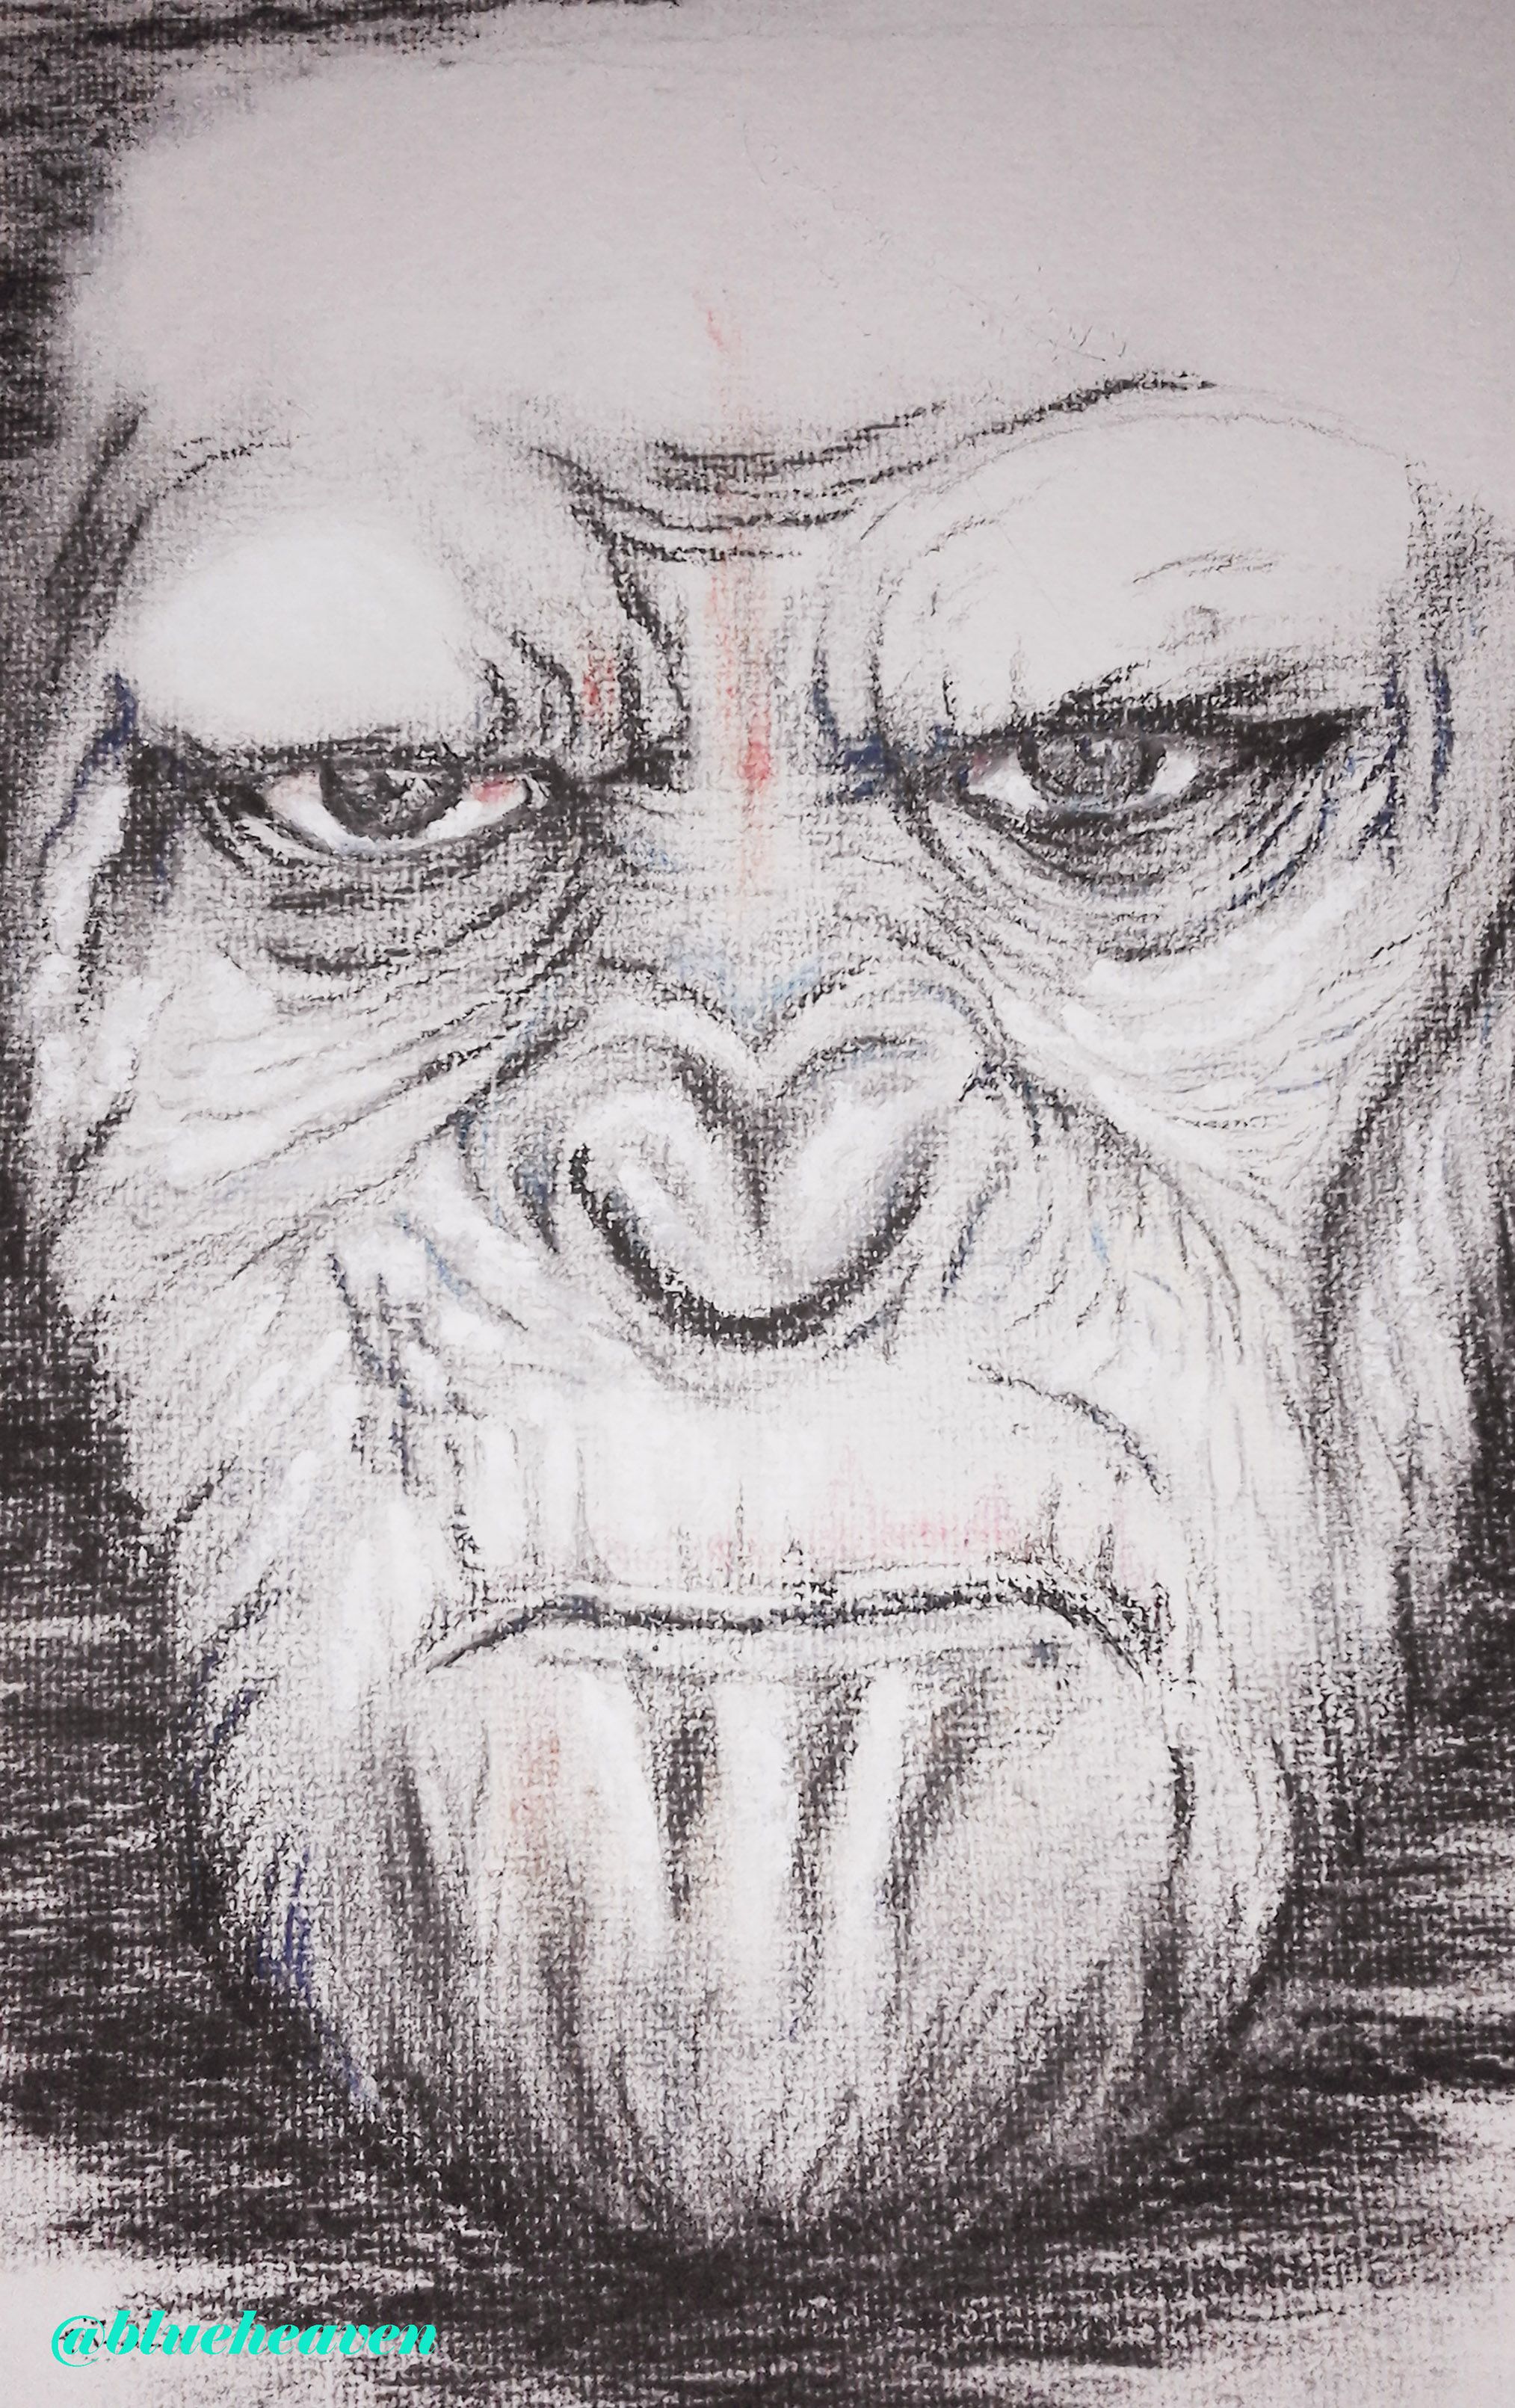 How to Draw King Kong Step by Step | King kong, King kong art, Easy drawings